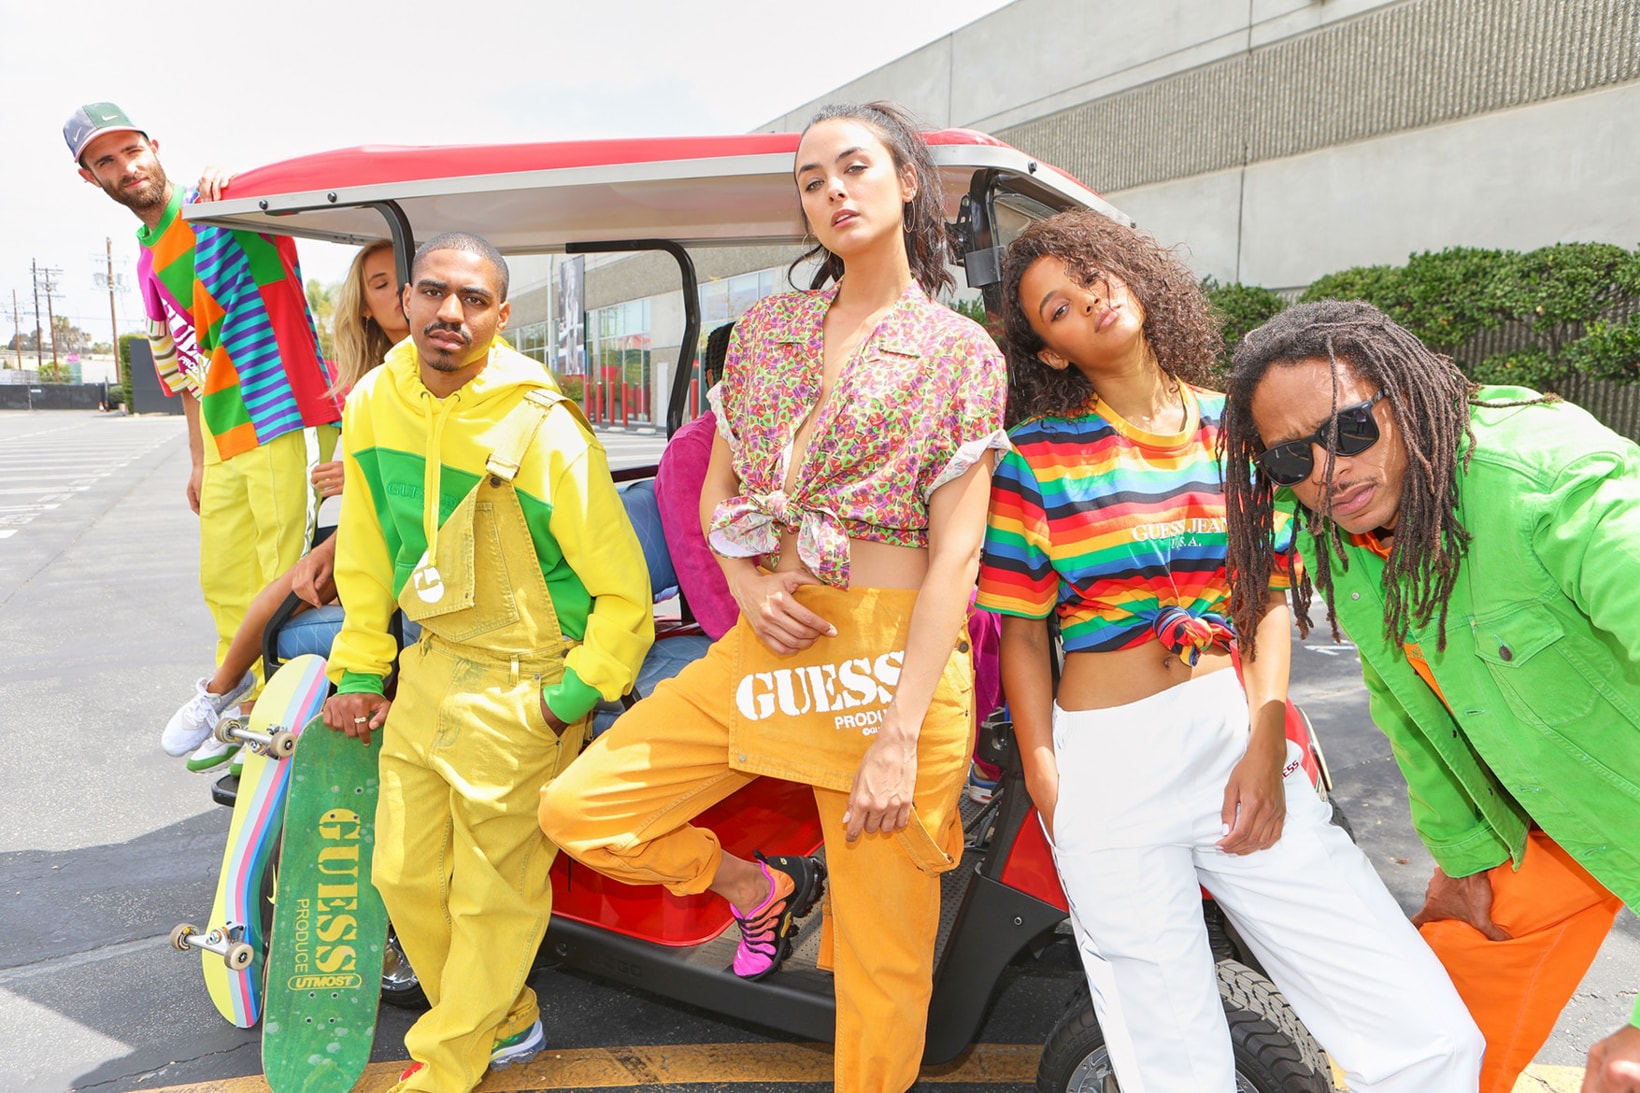 Sean Wotherspoon x GUESS Jeans U.S.A. Farmers Market Collection Lookbook Overalls Hoodie Striped Shirt Yellow Orange Red Black Green